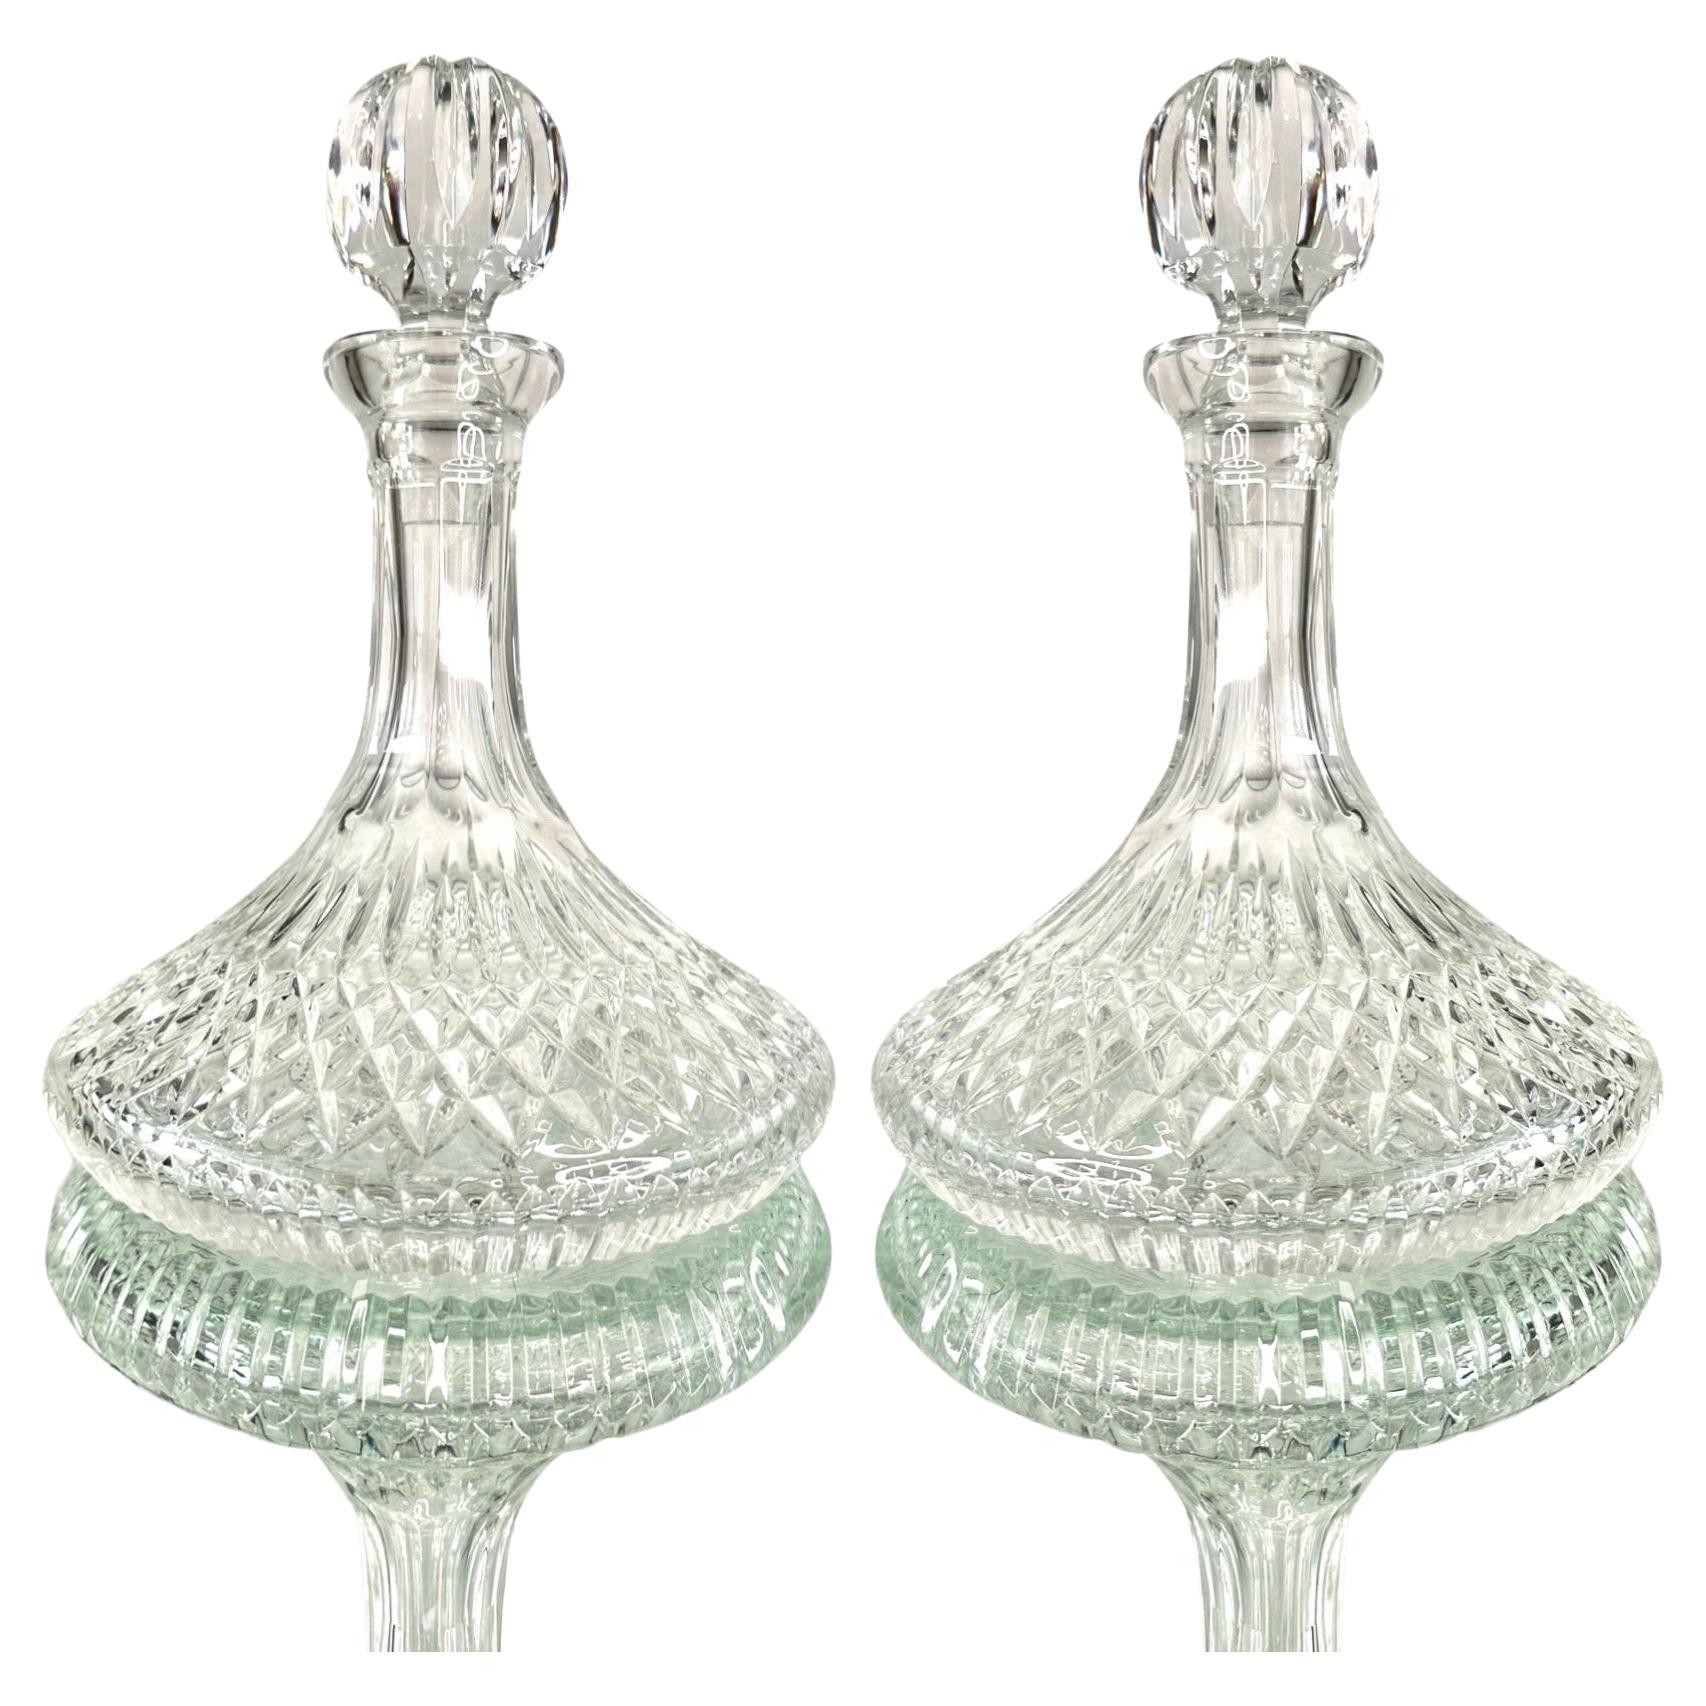 Pair of Vintage Waterford Crystal Ships Decanters with Diamond Cuts, c. 1975